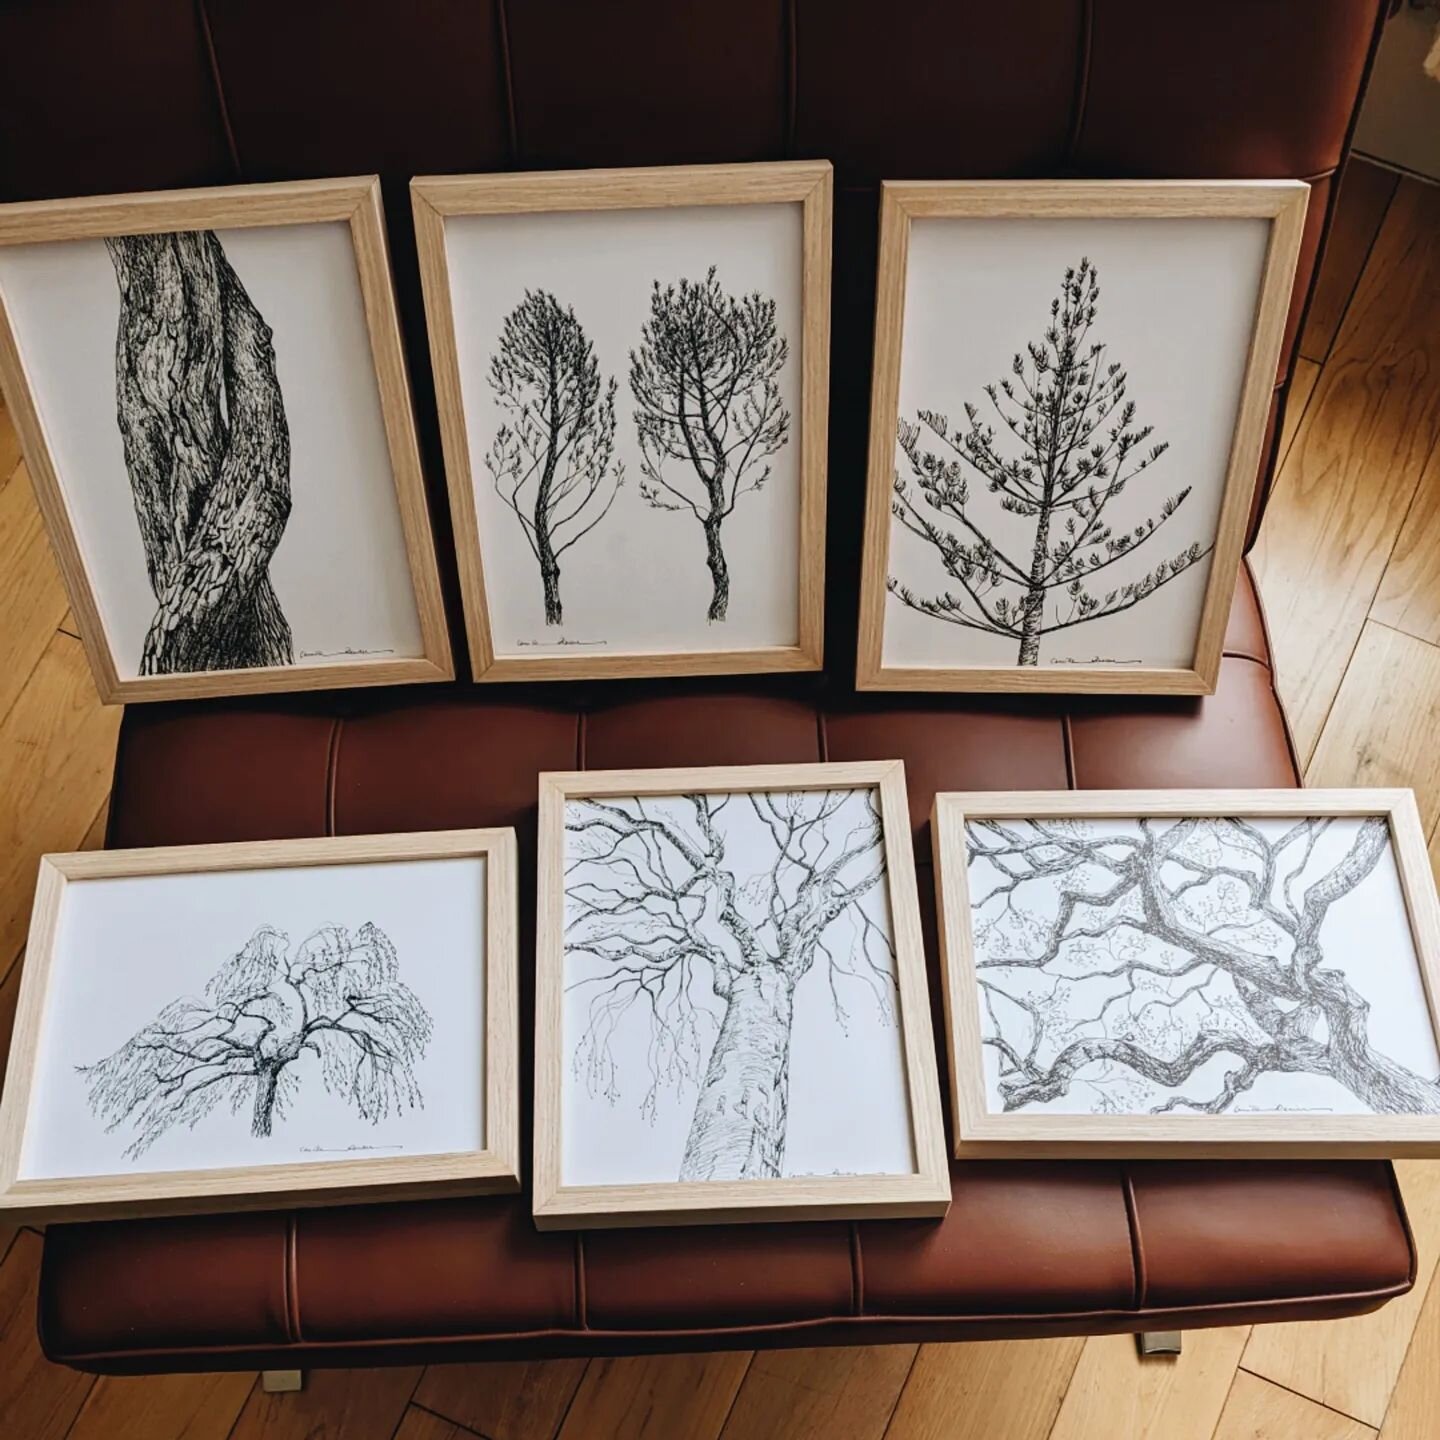 A selection of the smaller drawings I created in March, inspired from different trees around the world. Like a collection of curiosities, with different emotions, movements and angles. 🌿

The size 20x26cm (a bit smaller than A4) is perfect for an in